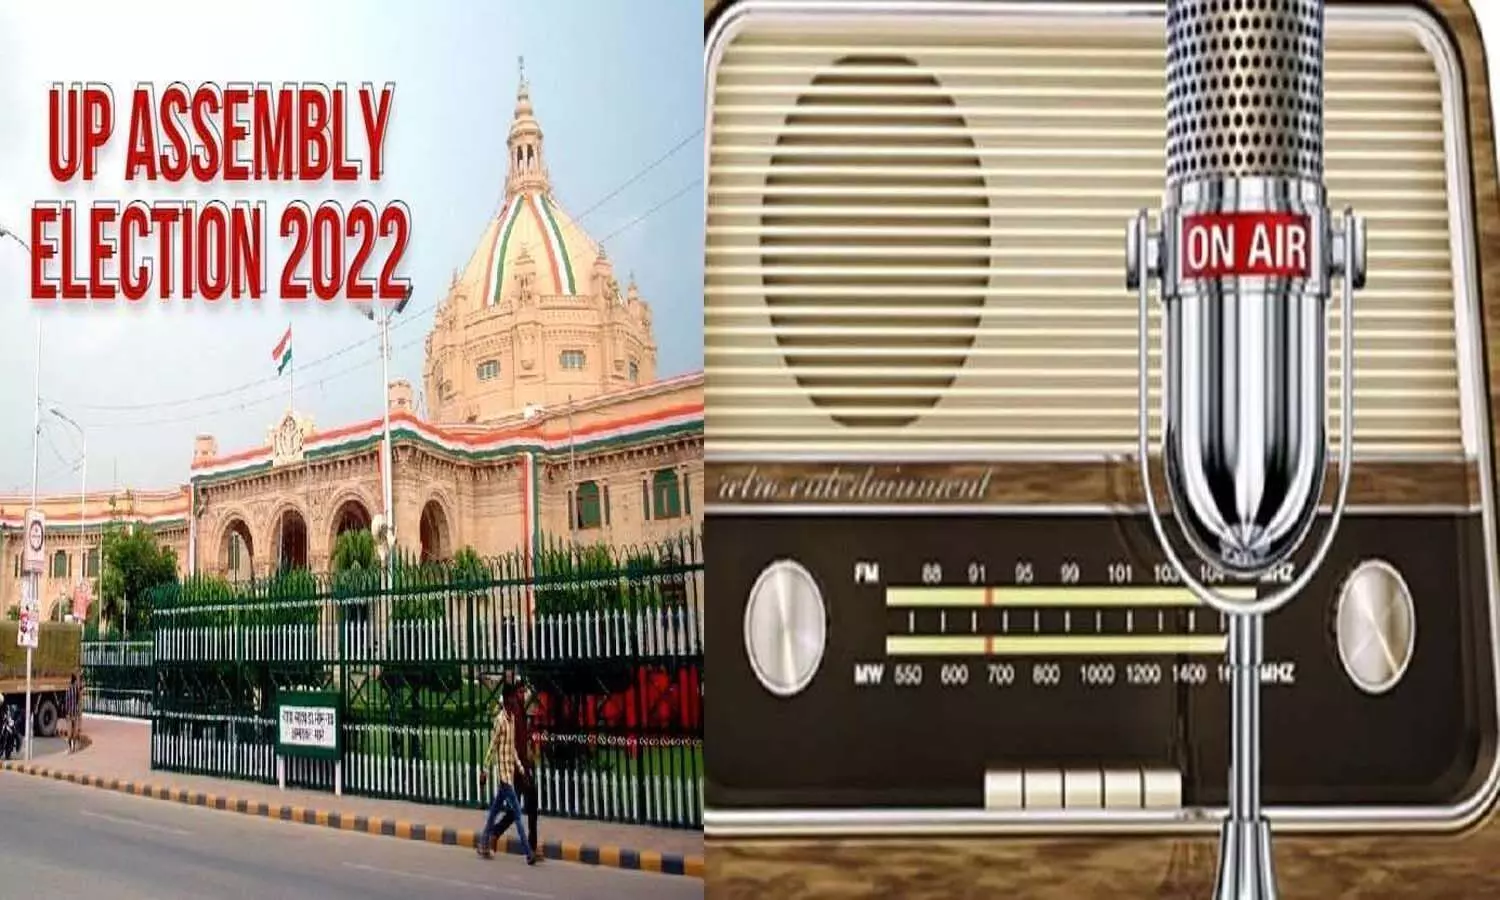 Assembly Election 2022 Campaign: When will the leader promote his party on TV radio, know here